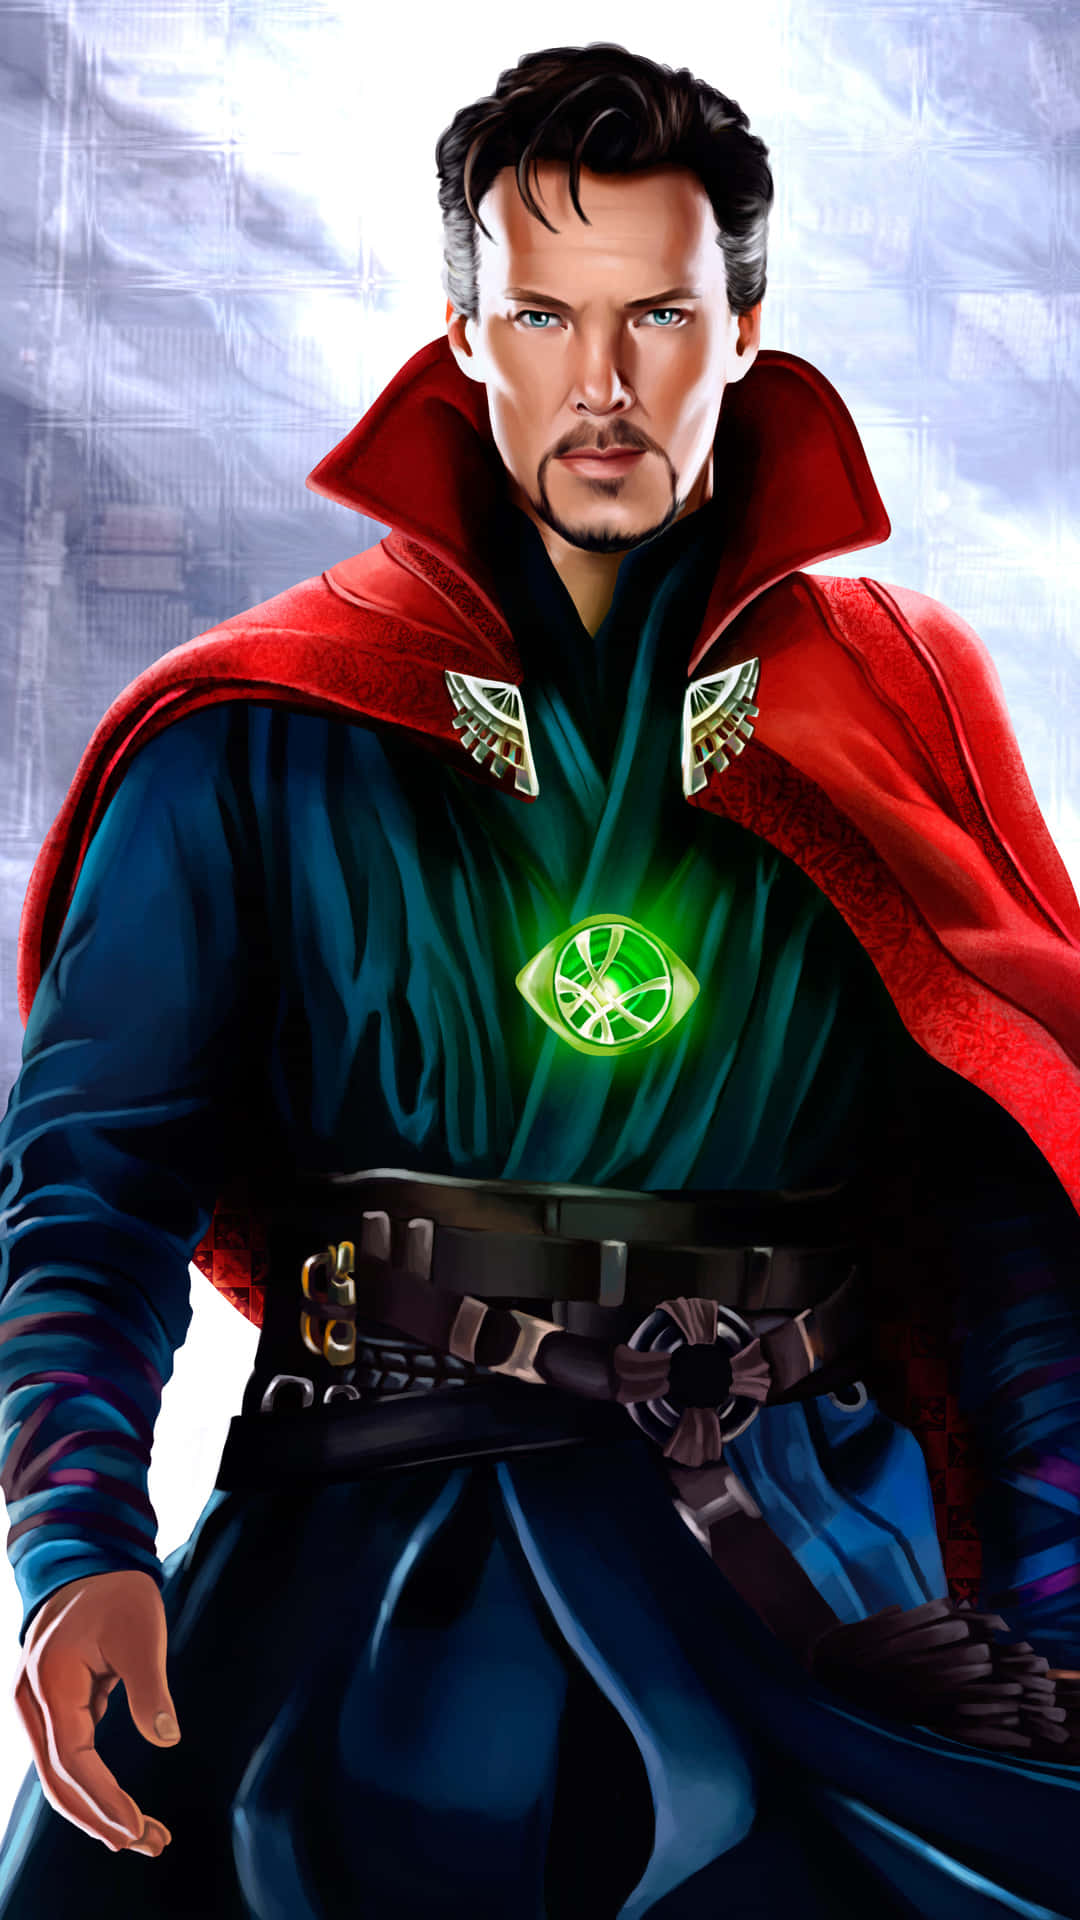 Unlock amazing powers from your Iphone with "Doctor Strange" Wallpaper